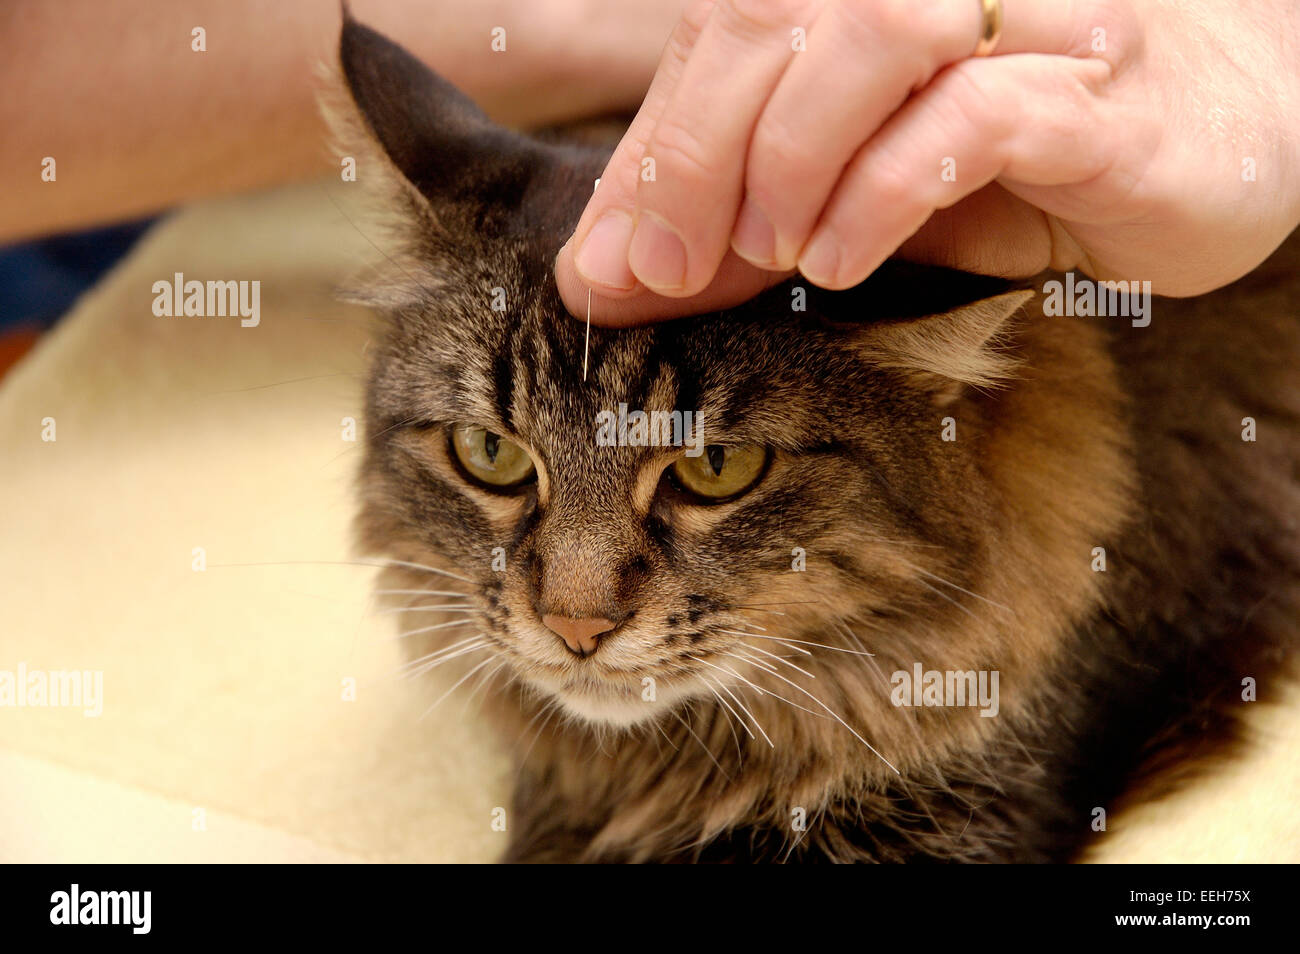 Cat is receiving acupuncture treatment Stock Photo